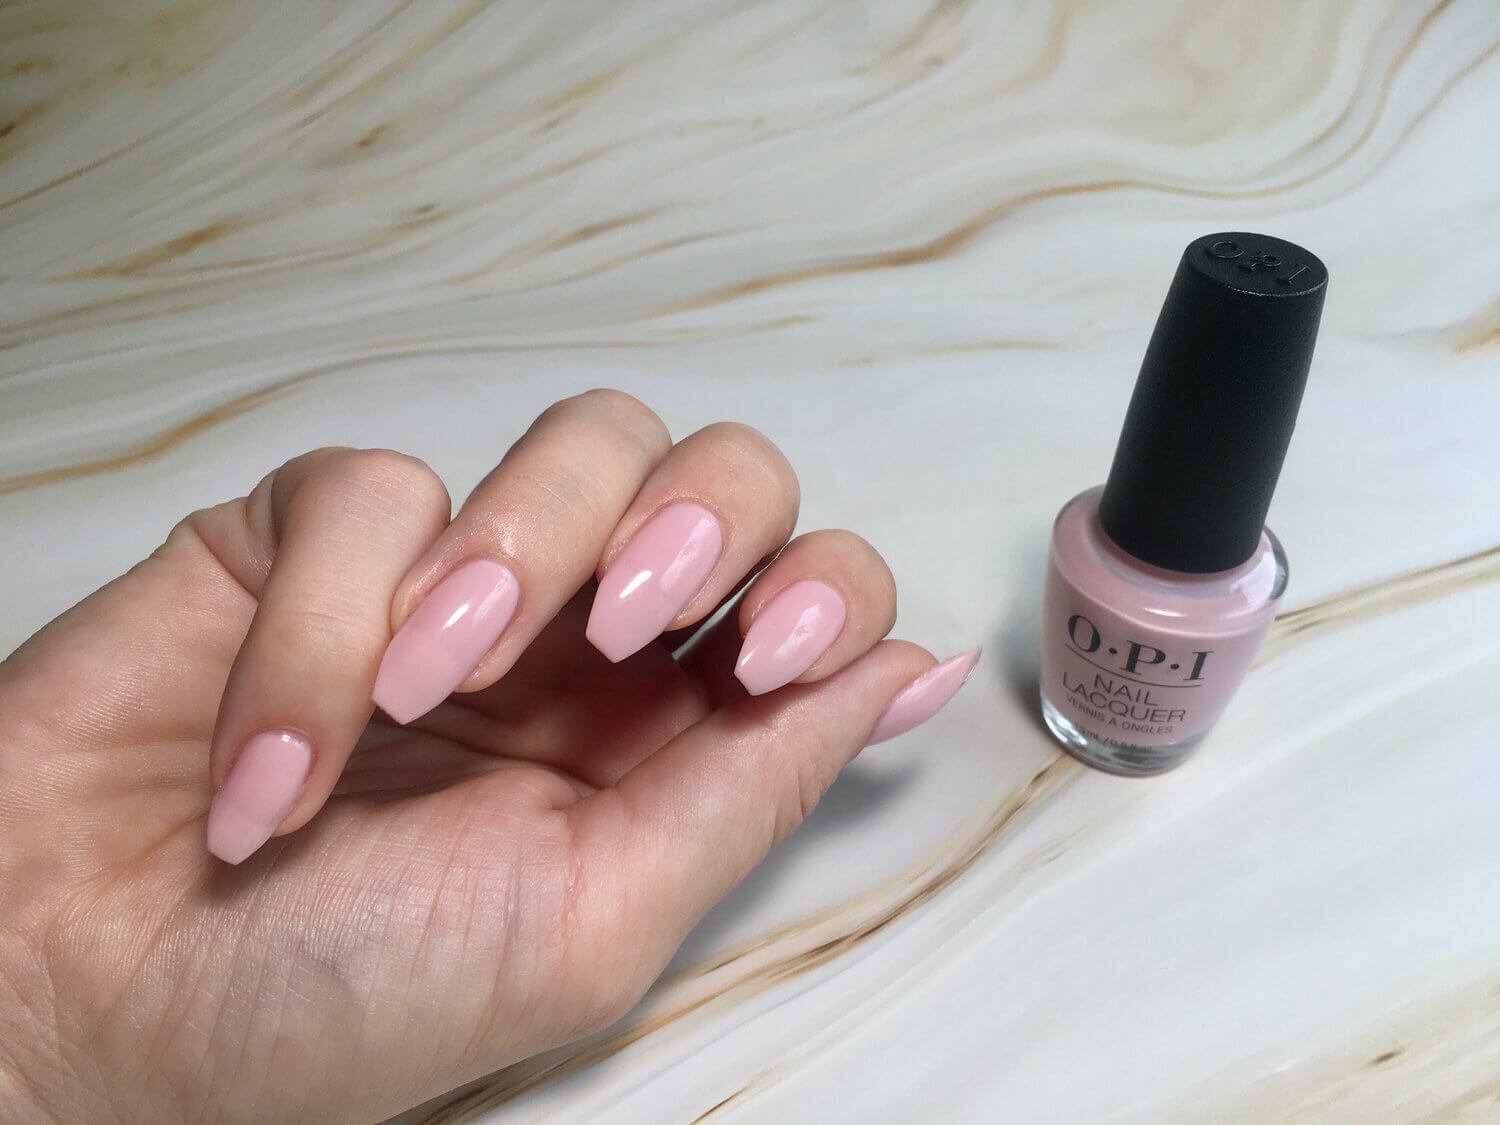 4. OPI GelColor in "Put it in Neutral" - wide 8